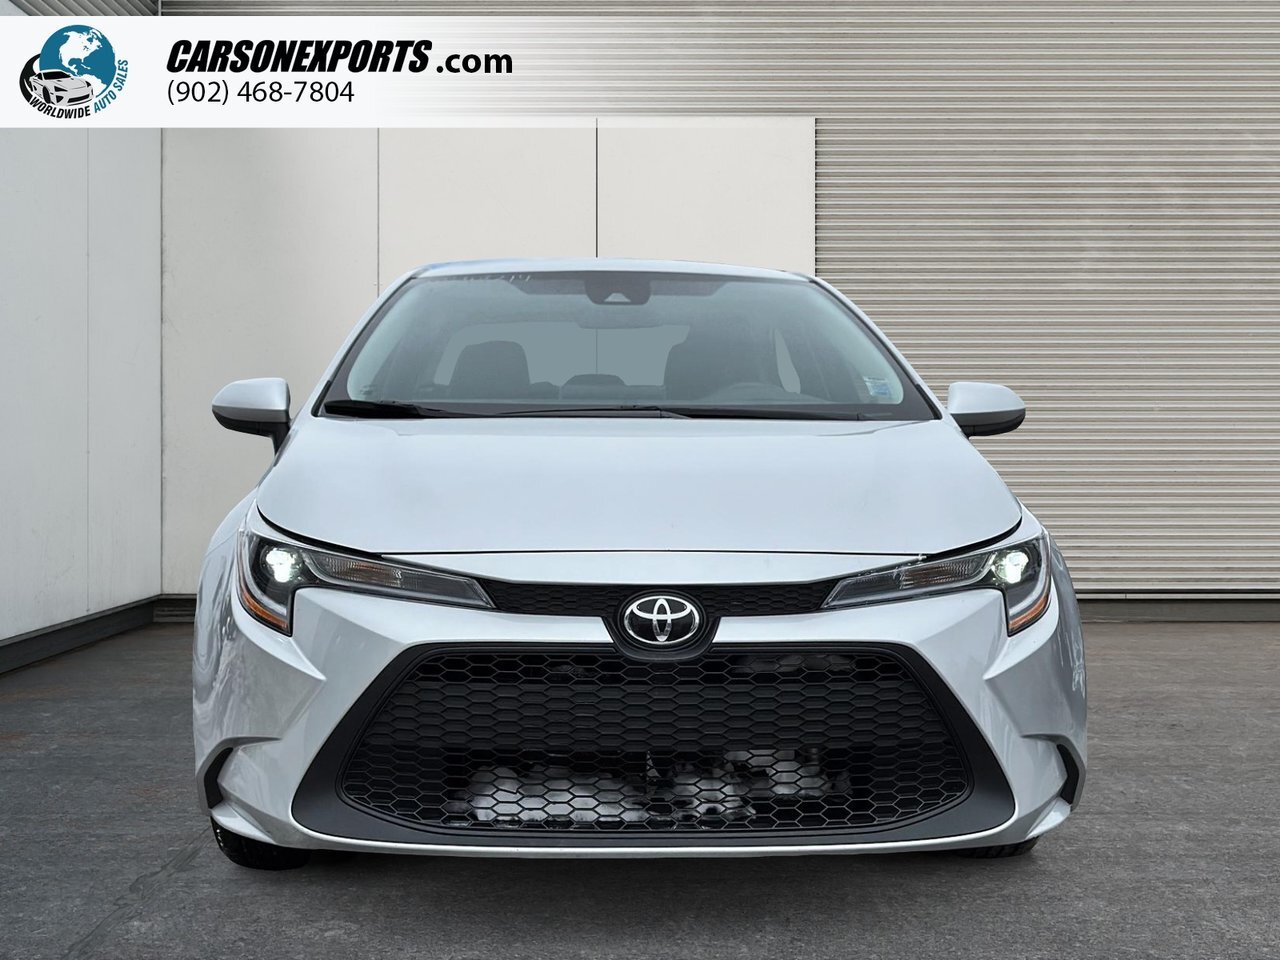 2021 Toyota Corolla LE UPGRADE The best place to buy a used car. Perio